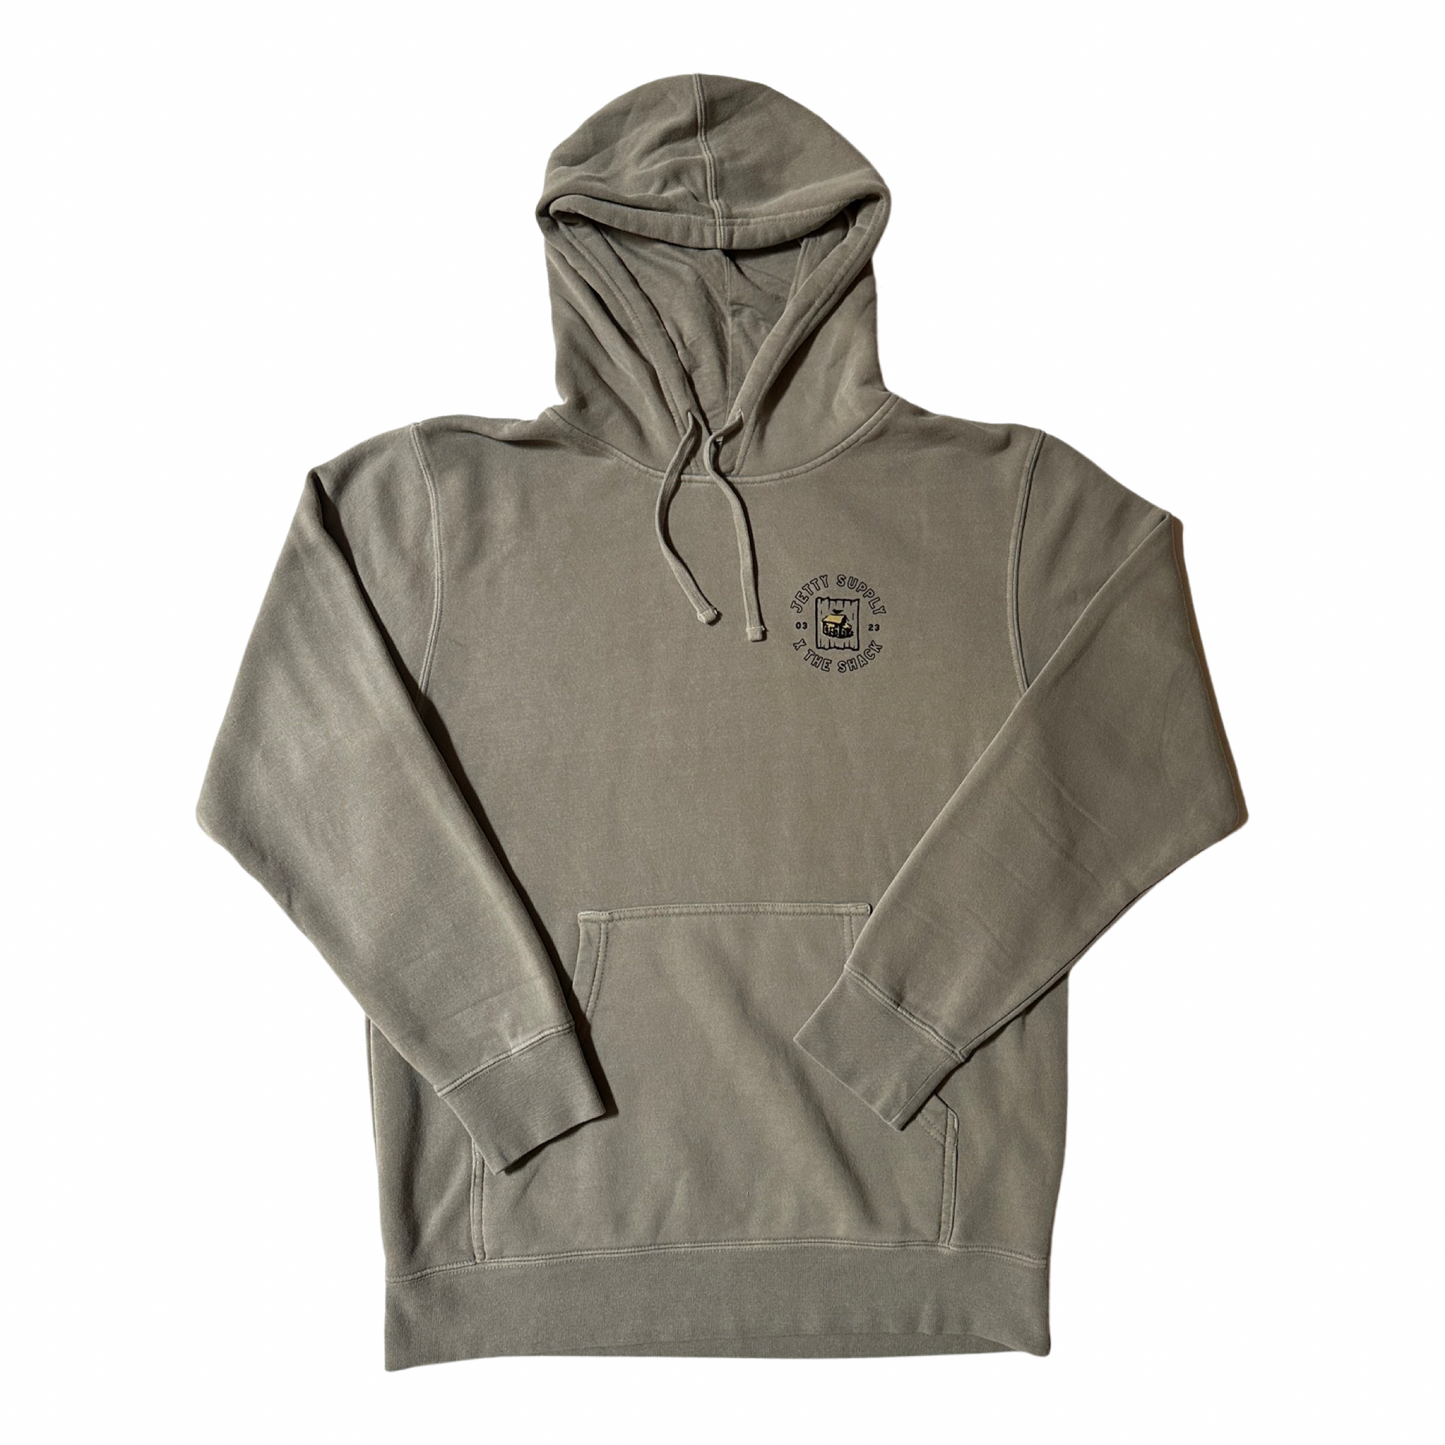 Surf Shack South x Jetty 20 Years Hoodie (New Color)